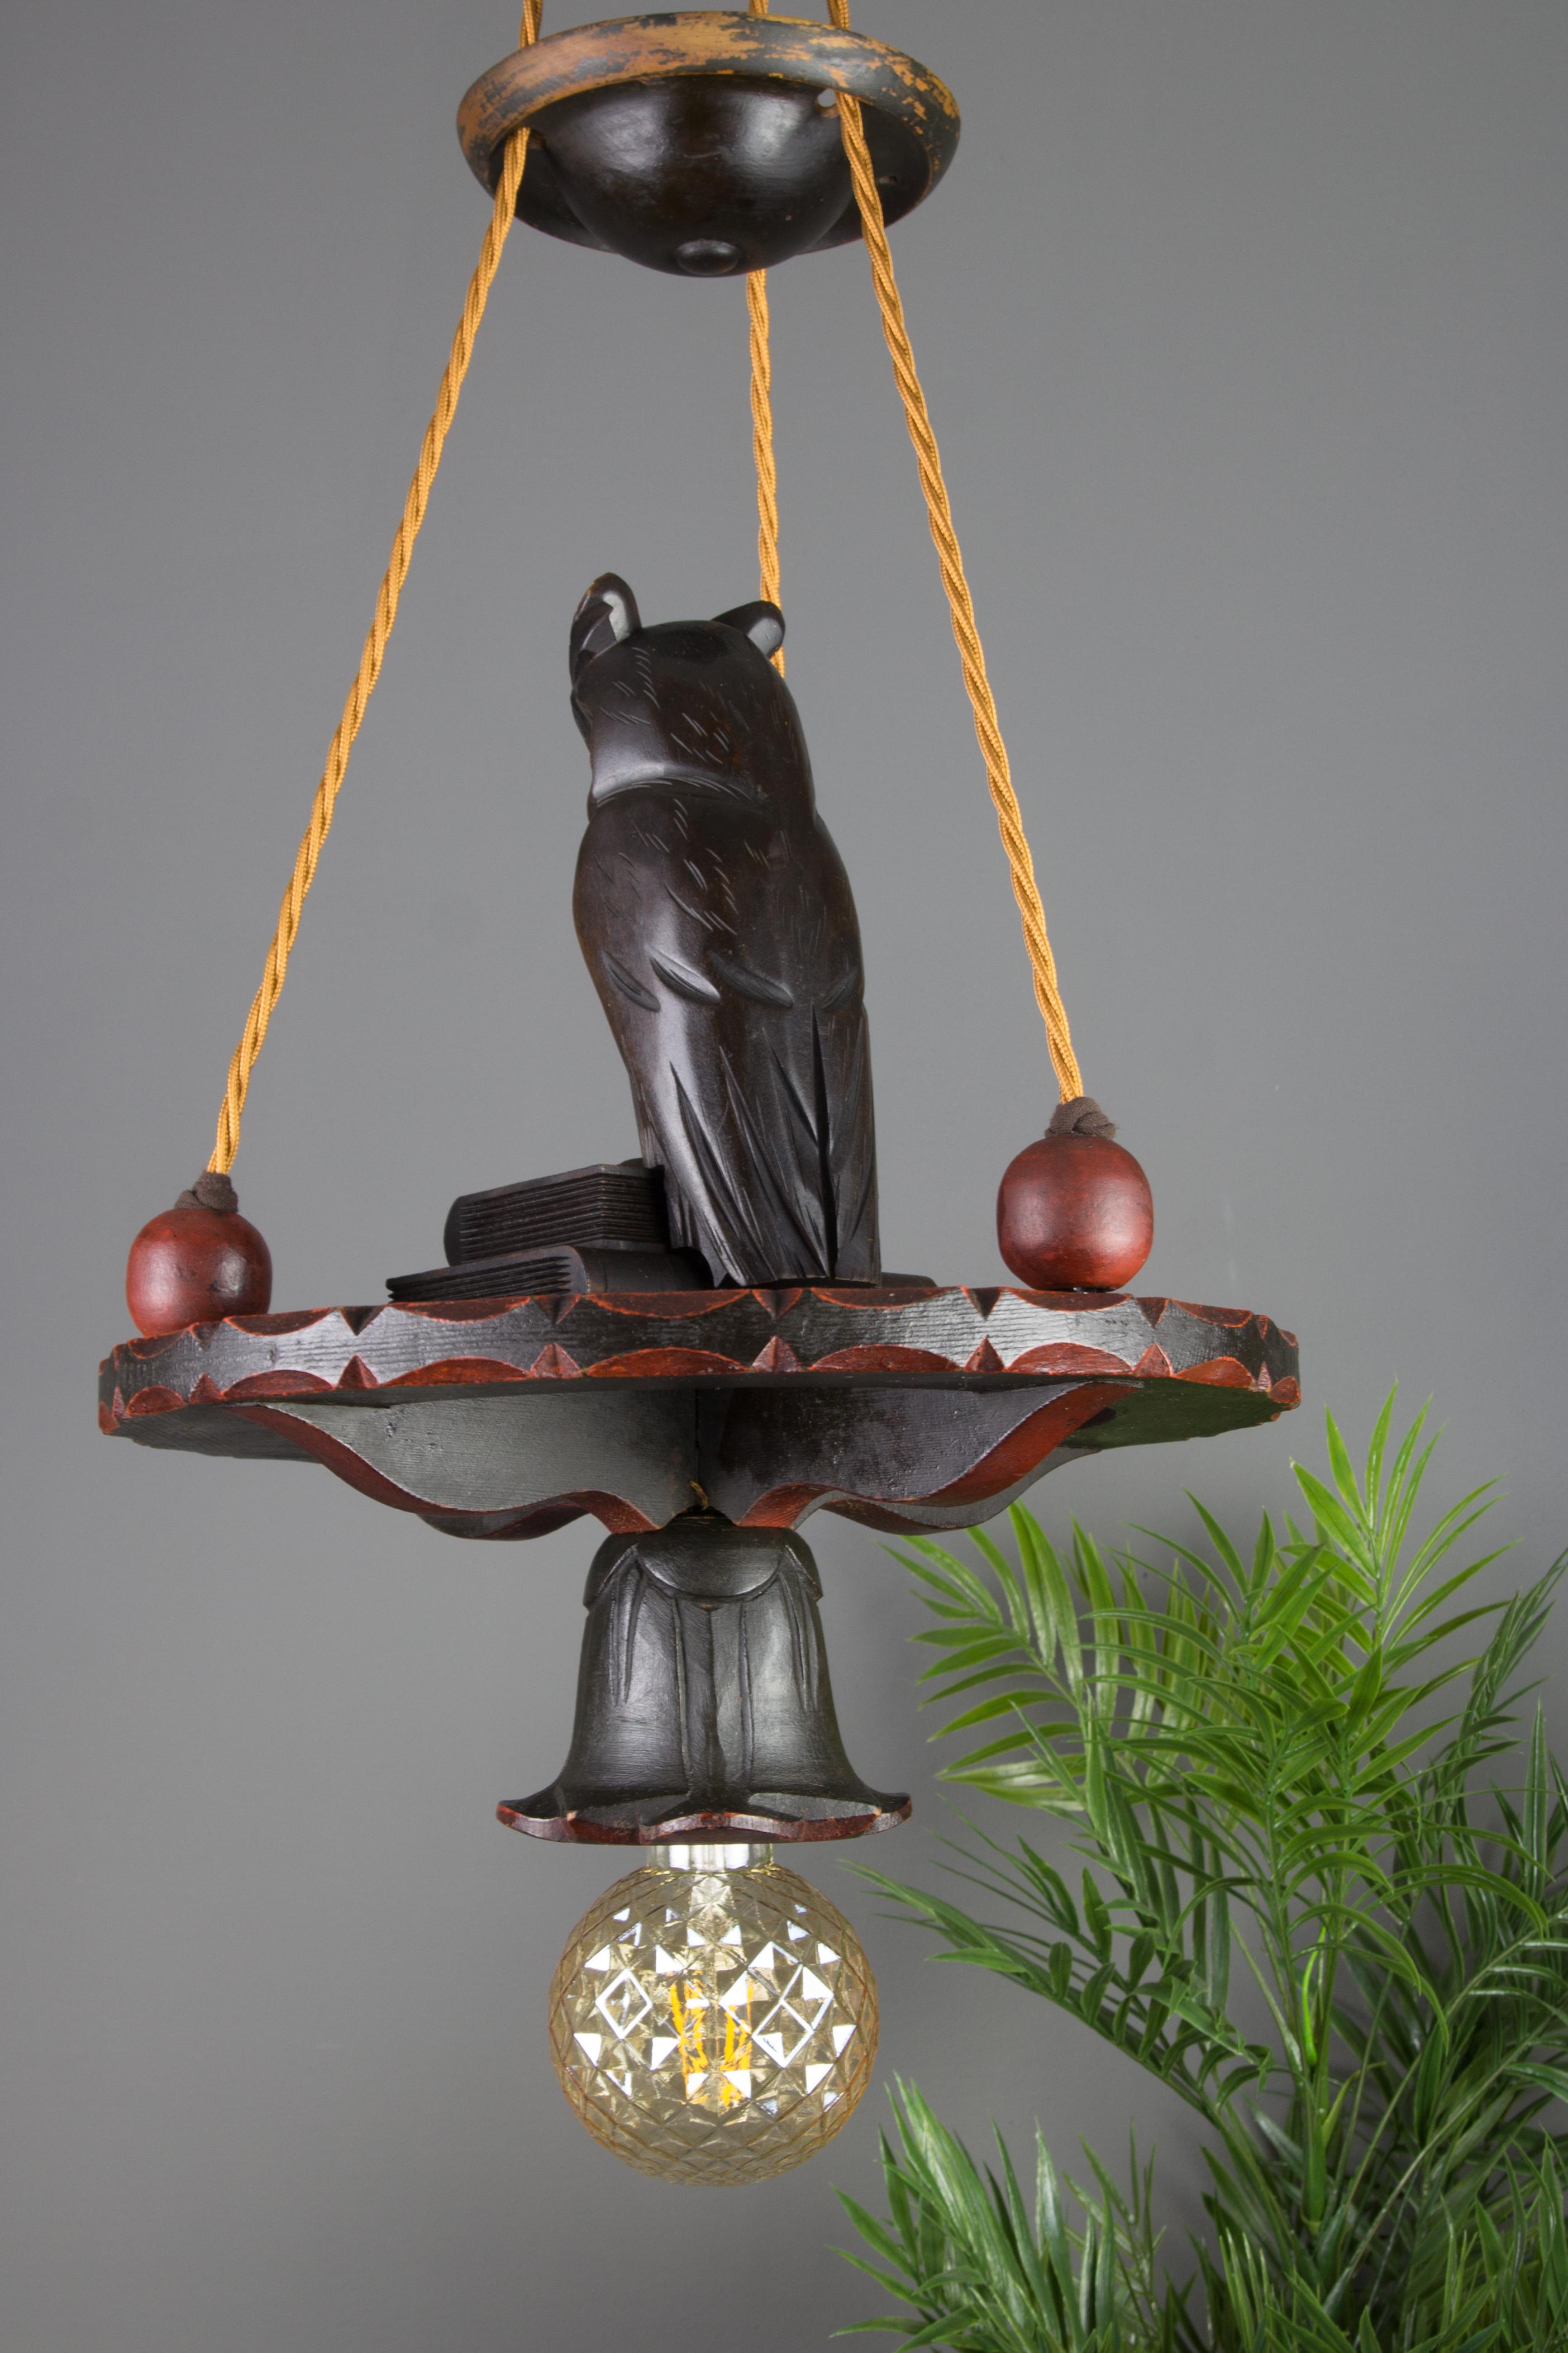 Hand-Carved German Hand Carved Wooden Pendant Light Chandelier with Owl Sculpture, 1920s